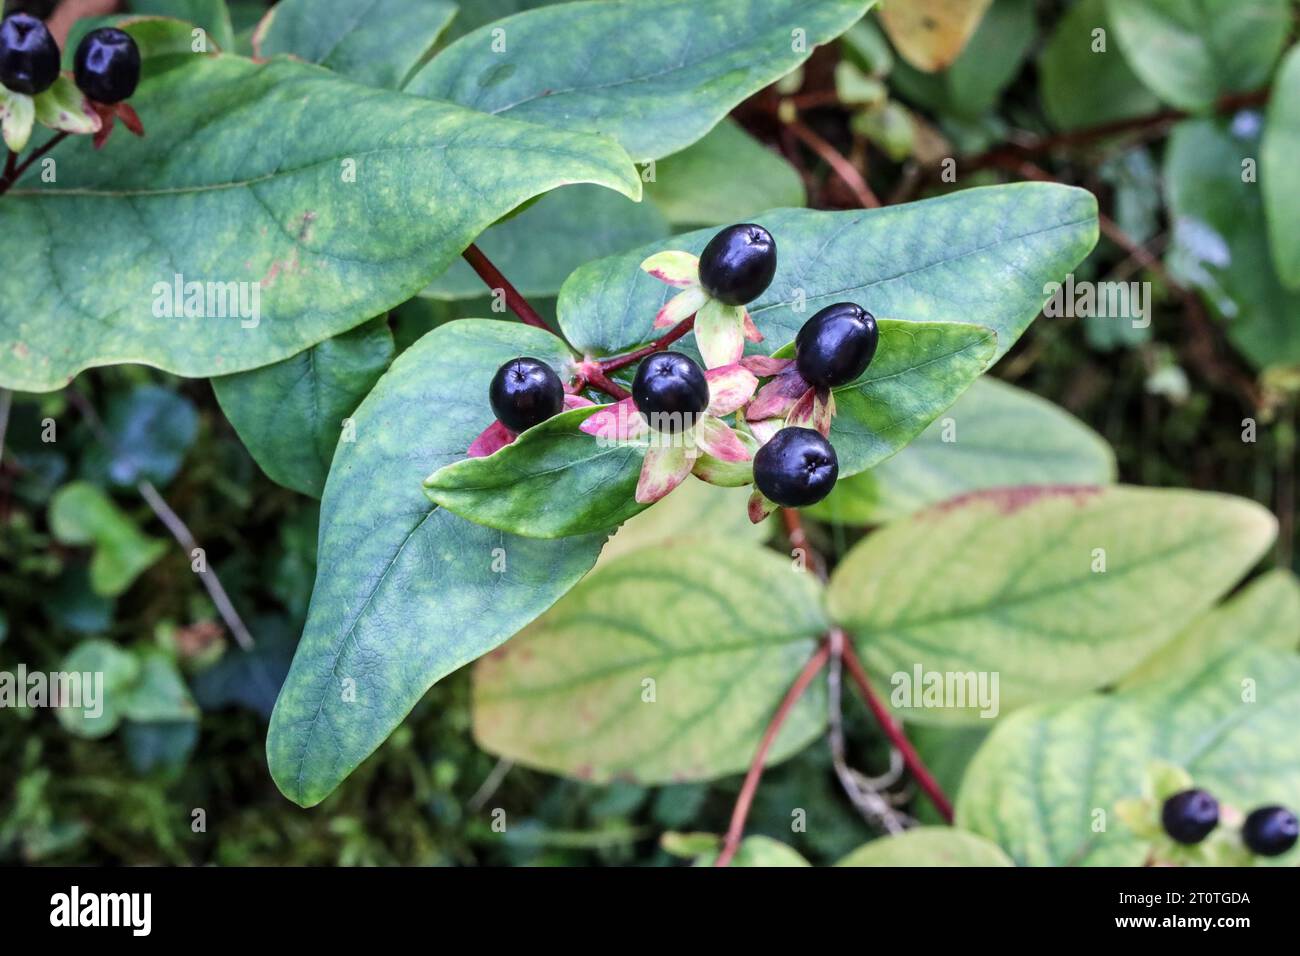 Atropa Belladonna, also known as Deadly Nightshade, early October in the woodlands at Shaugh Bridge, Devon, UK Stock Photo